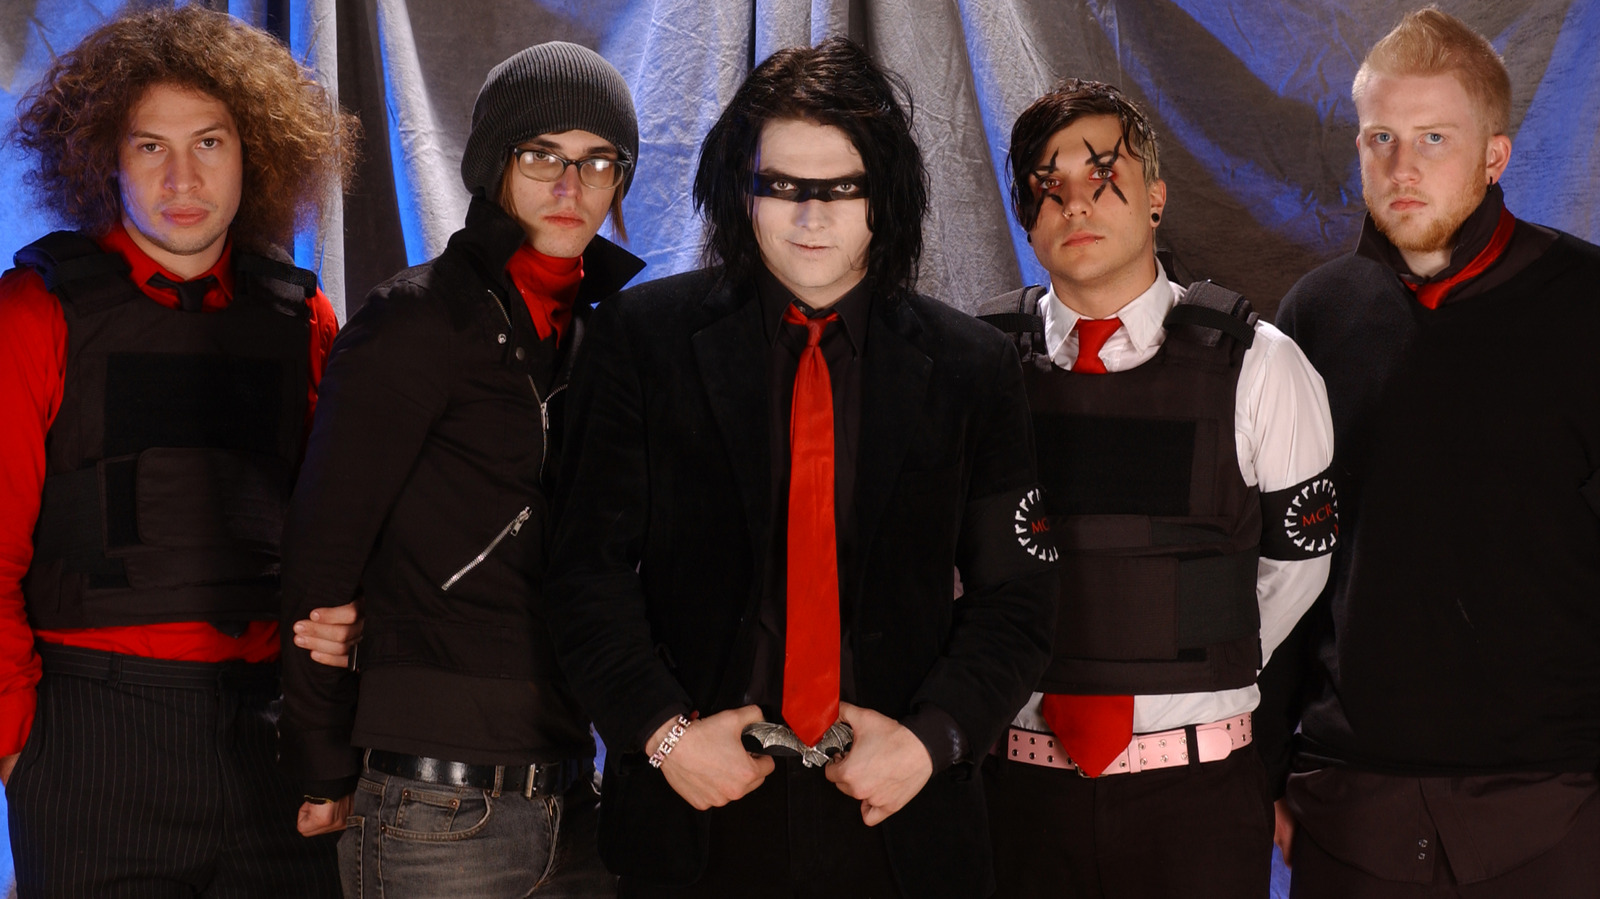 heres why my chemical romance really split up